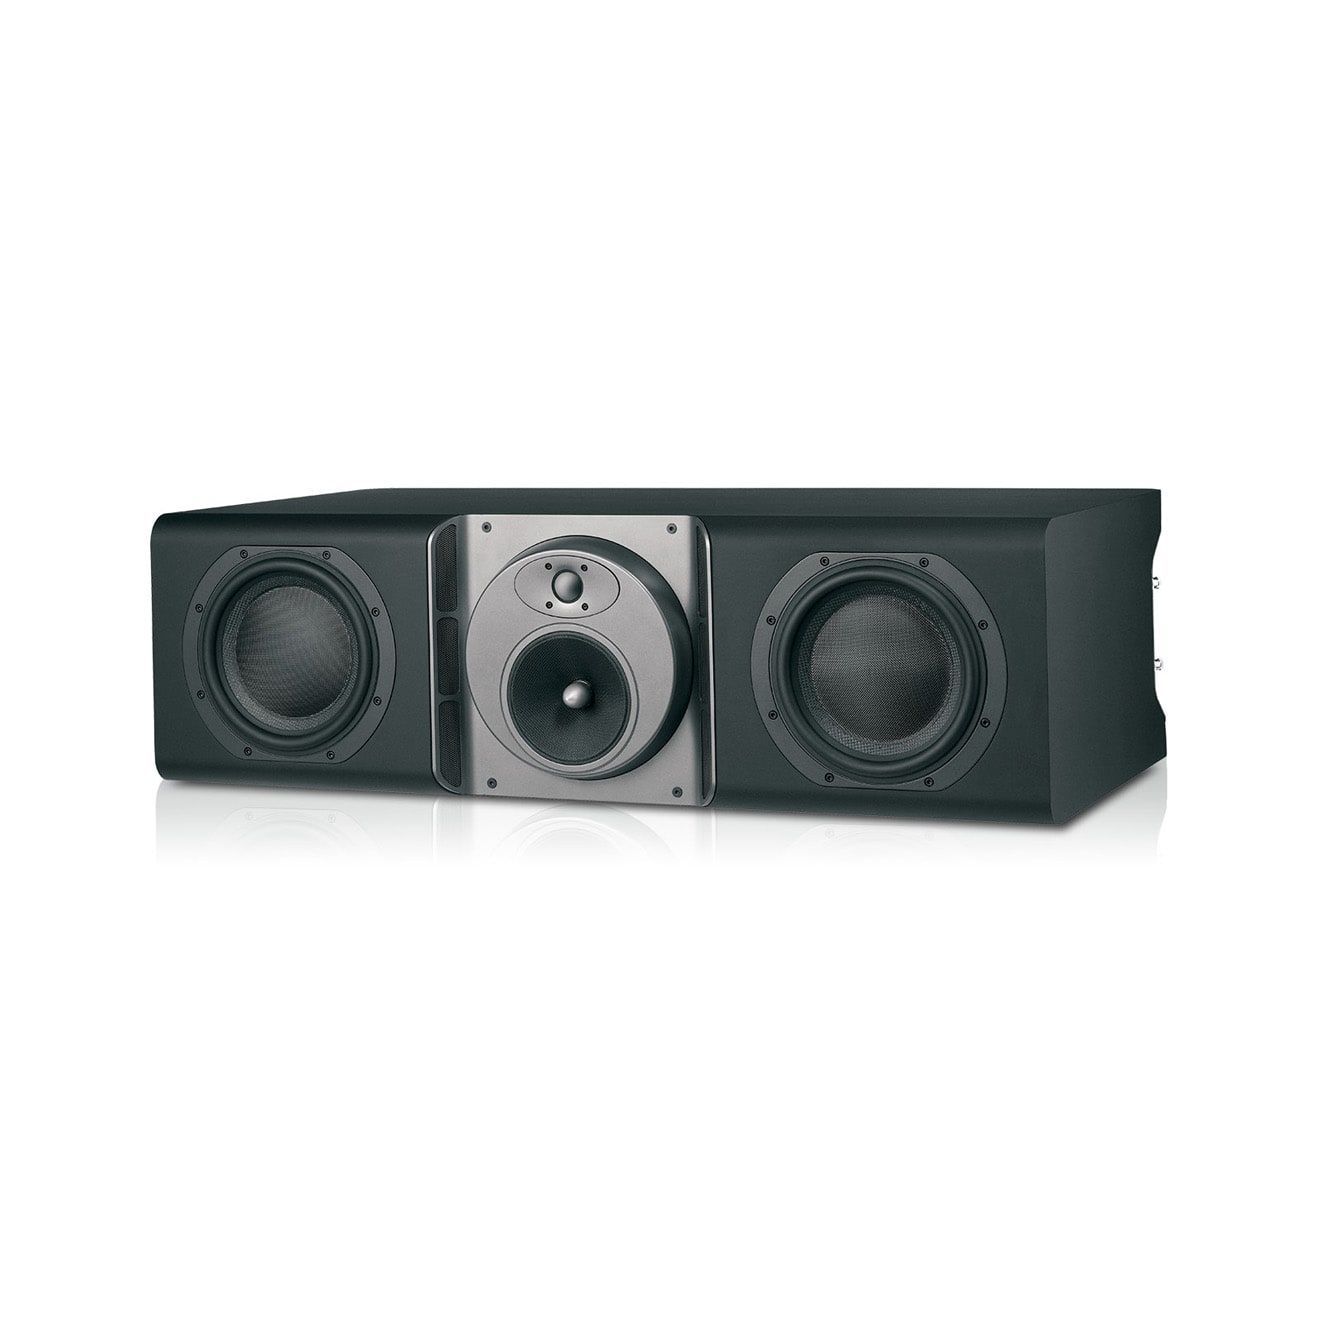 BOWERS & WILKINS CT8.4 LCRS 3-WAY CLOSED-BOX SYSTEM (EACH)